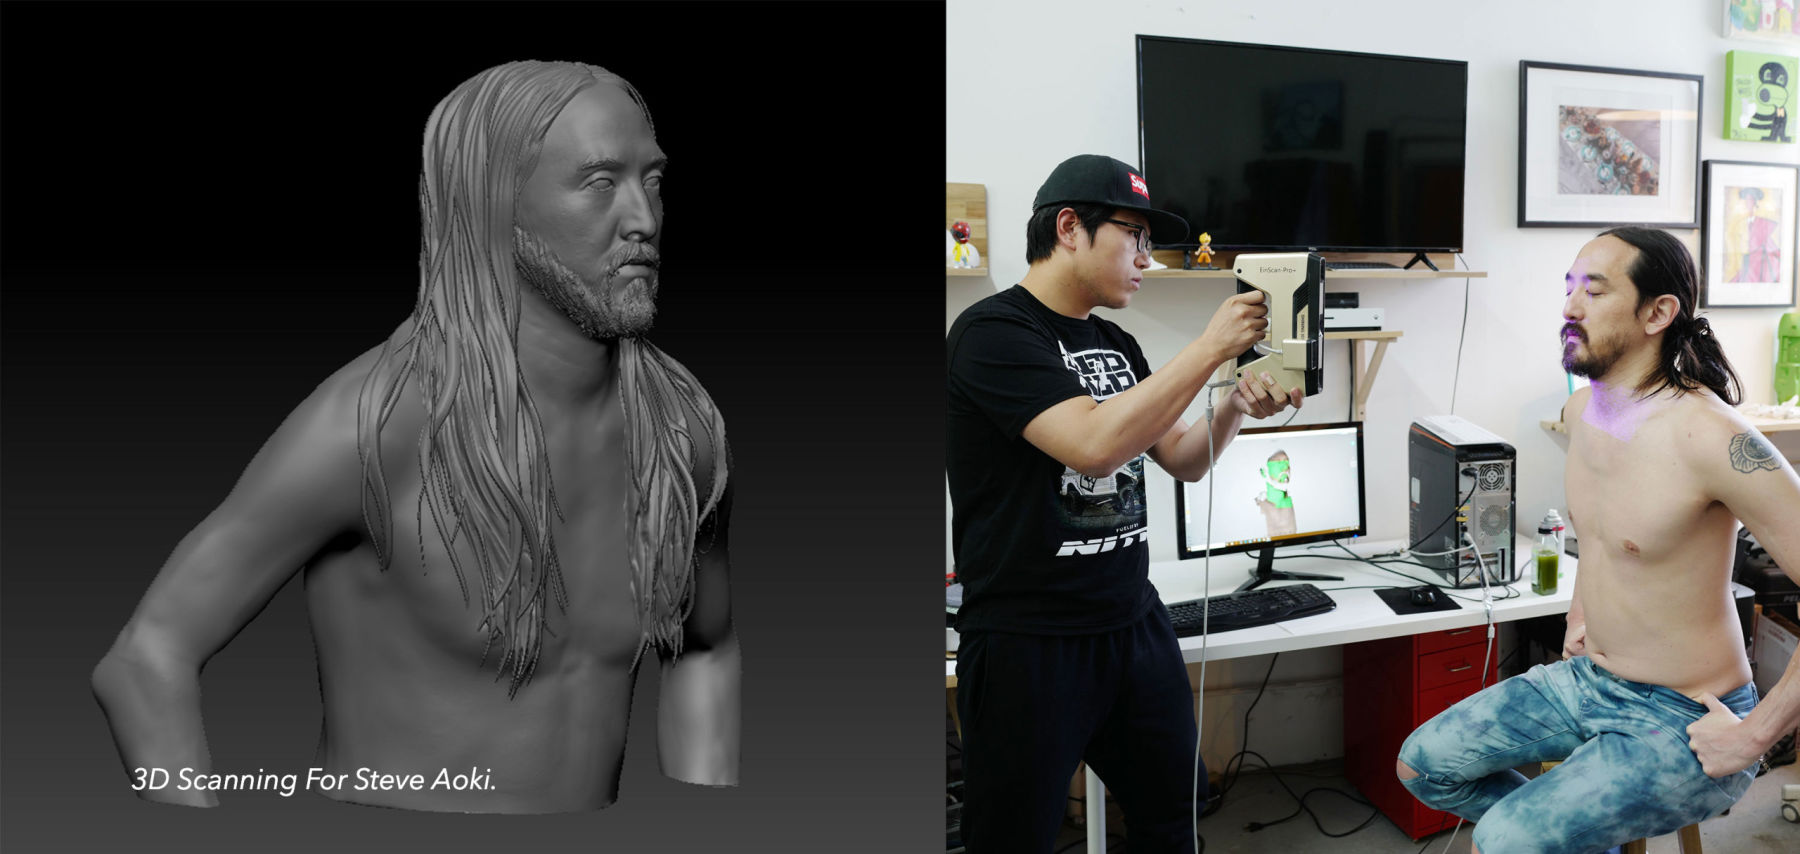 3D scanning steve aoki for his music video